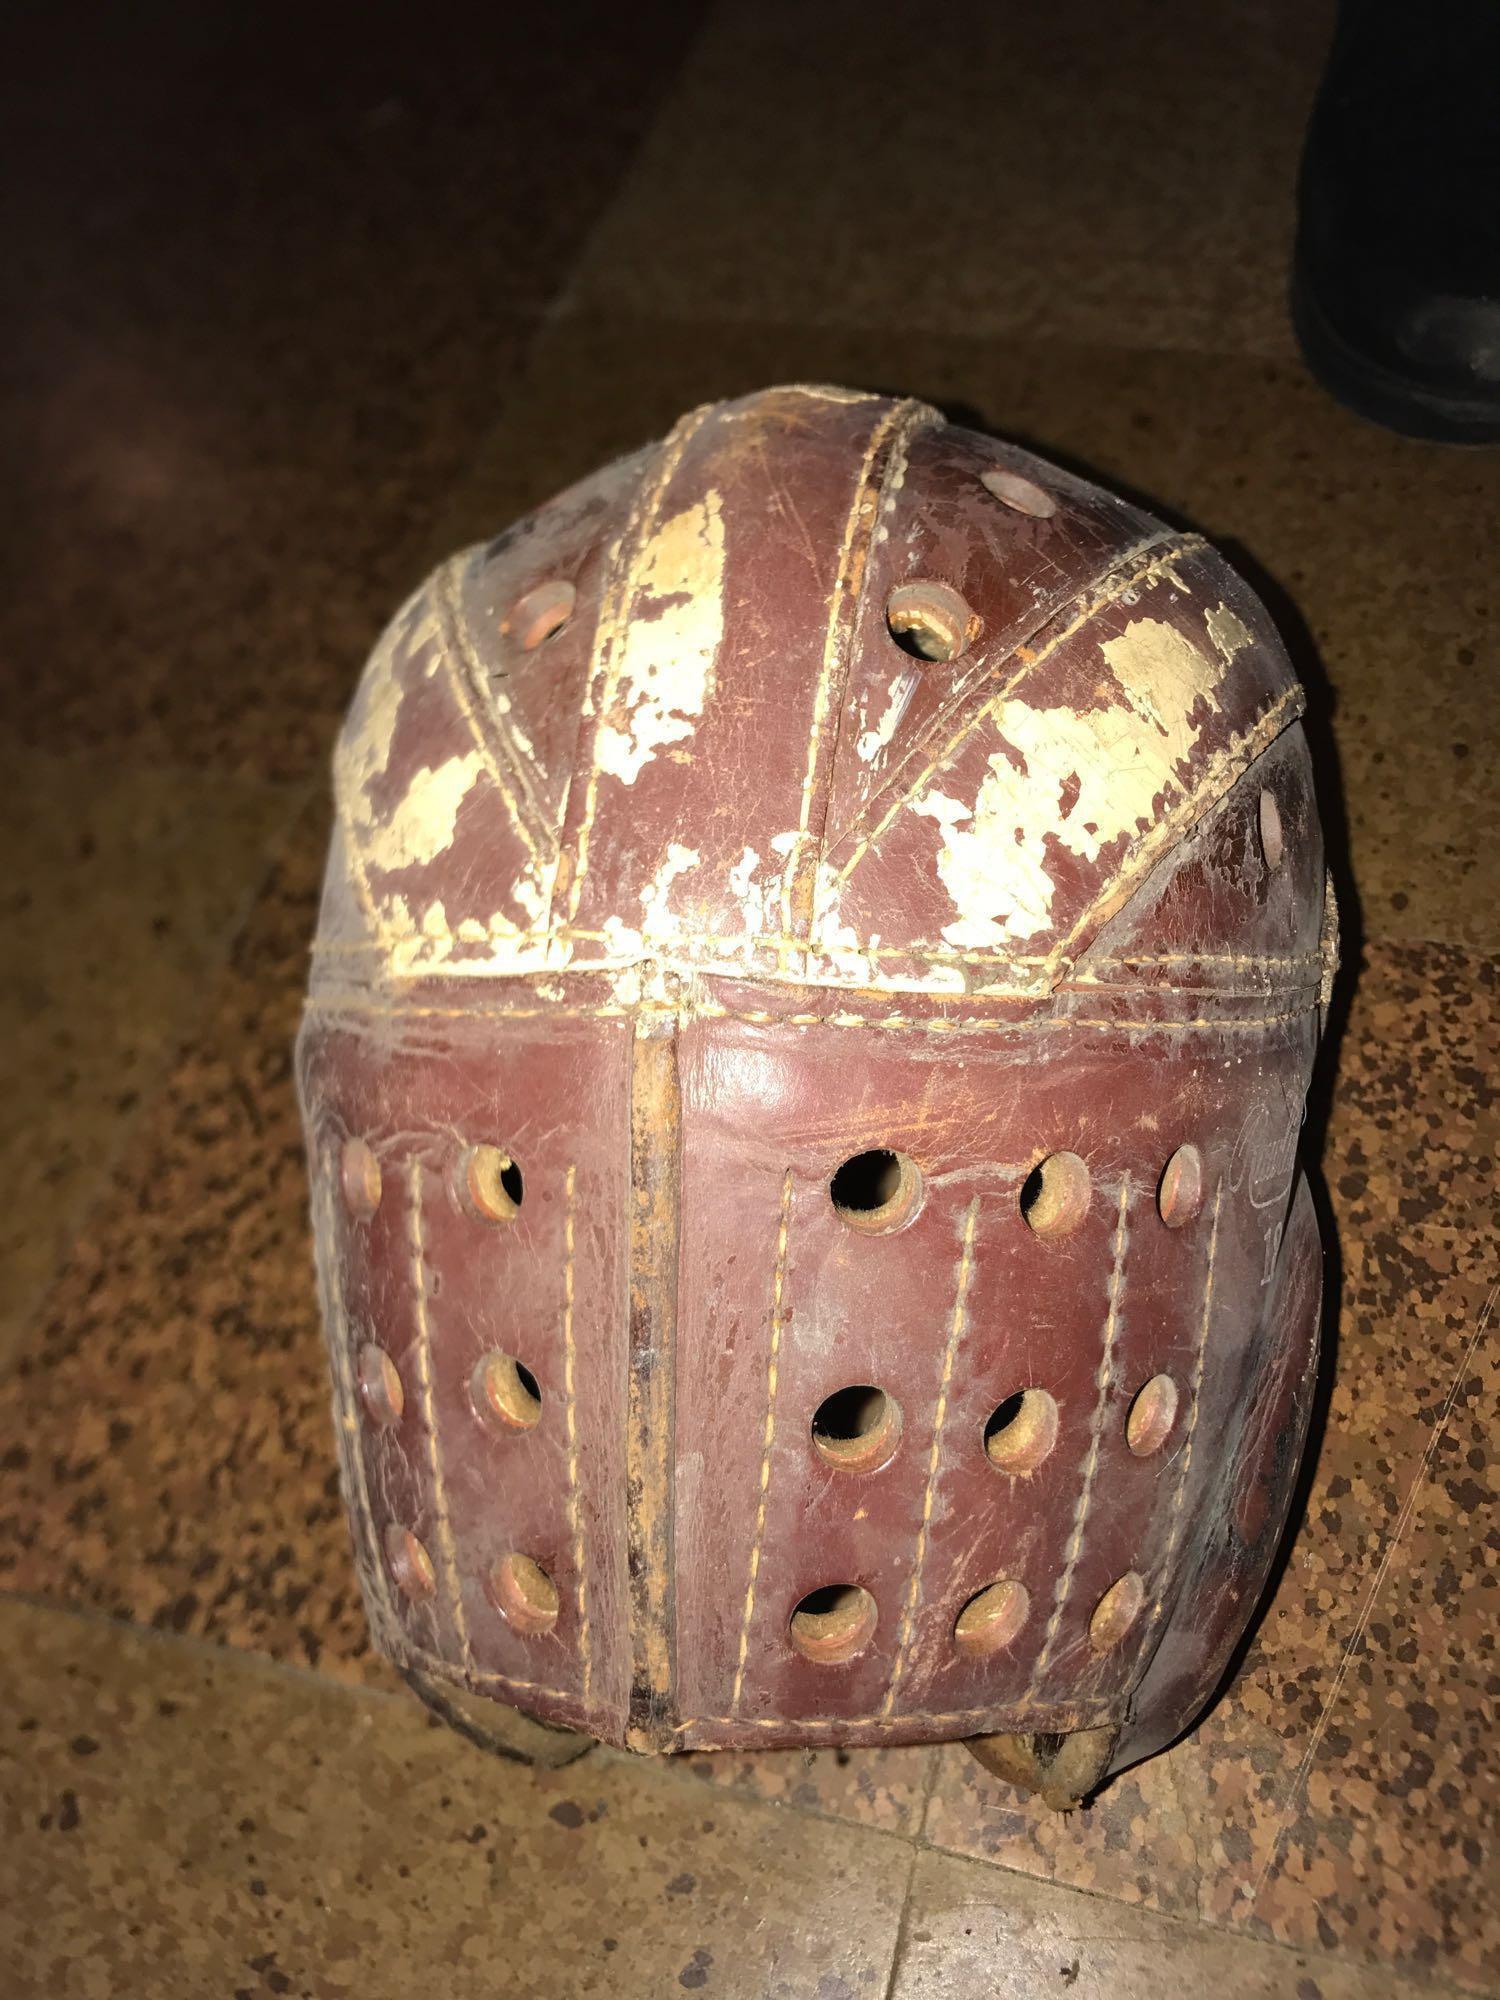 Early 1900's Central College Football Helmet